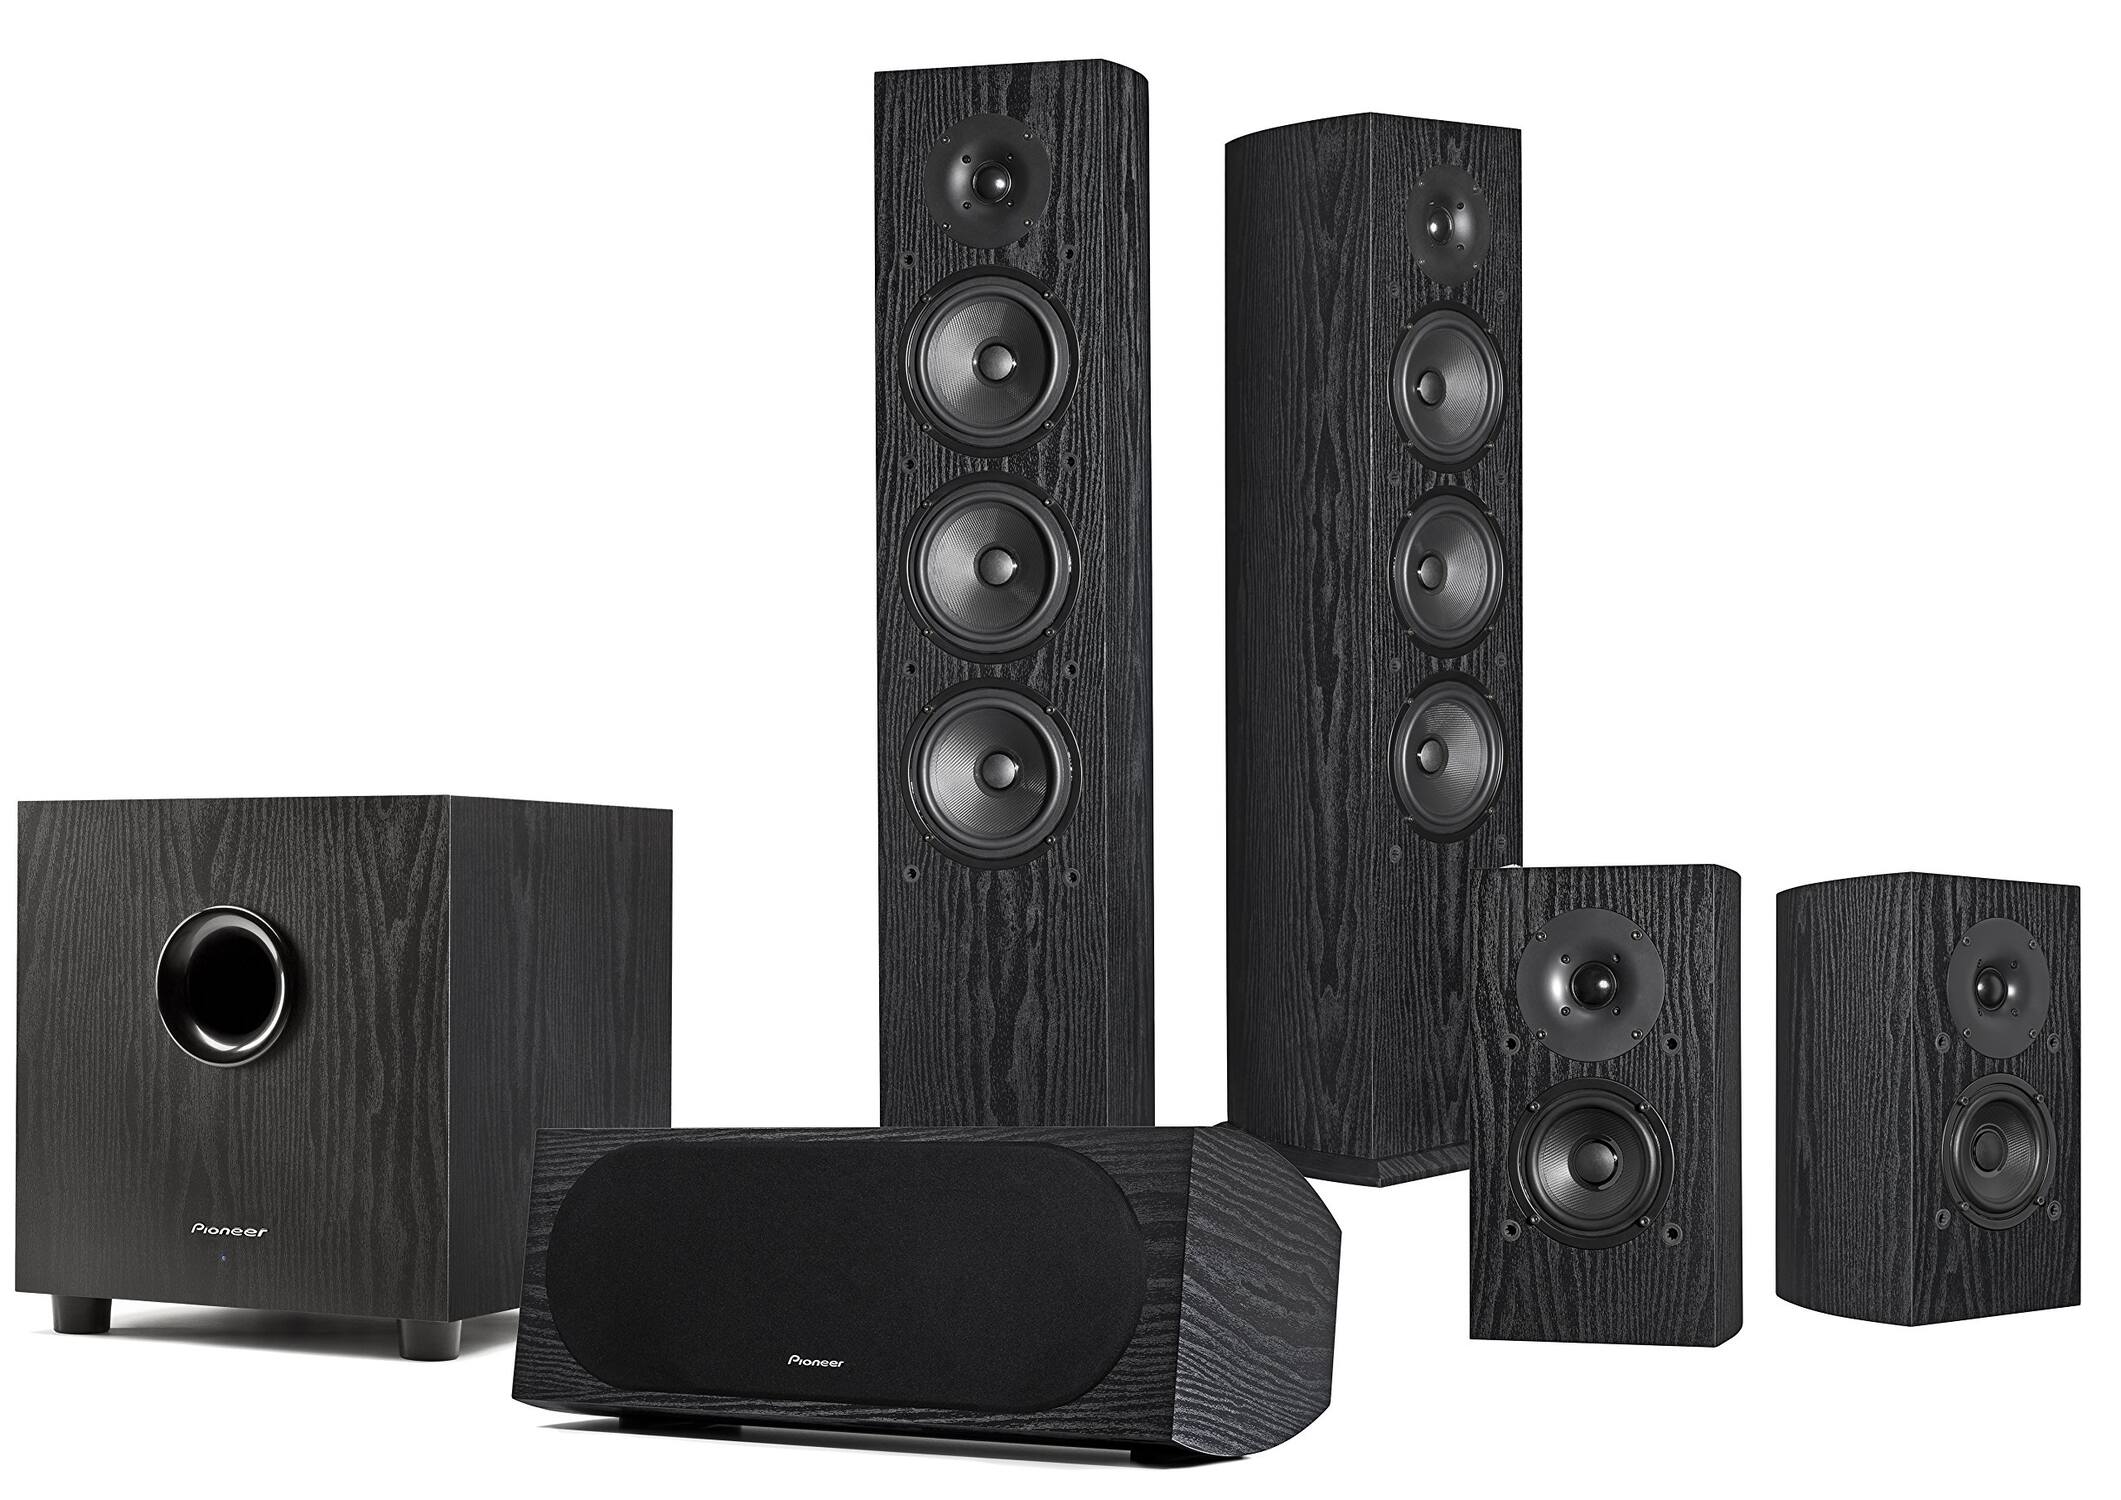 How To Set Up A Pioneer Surround Sound System